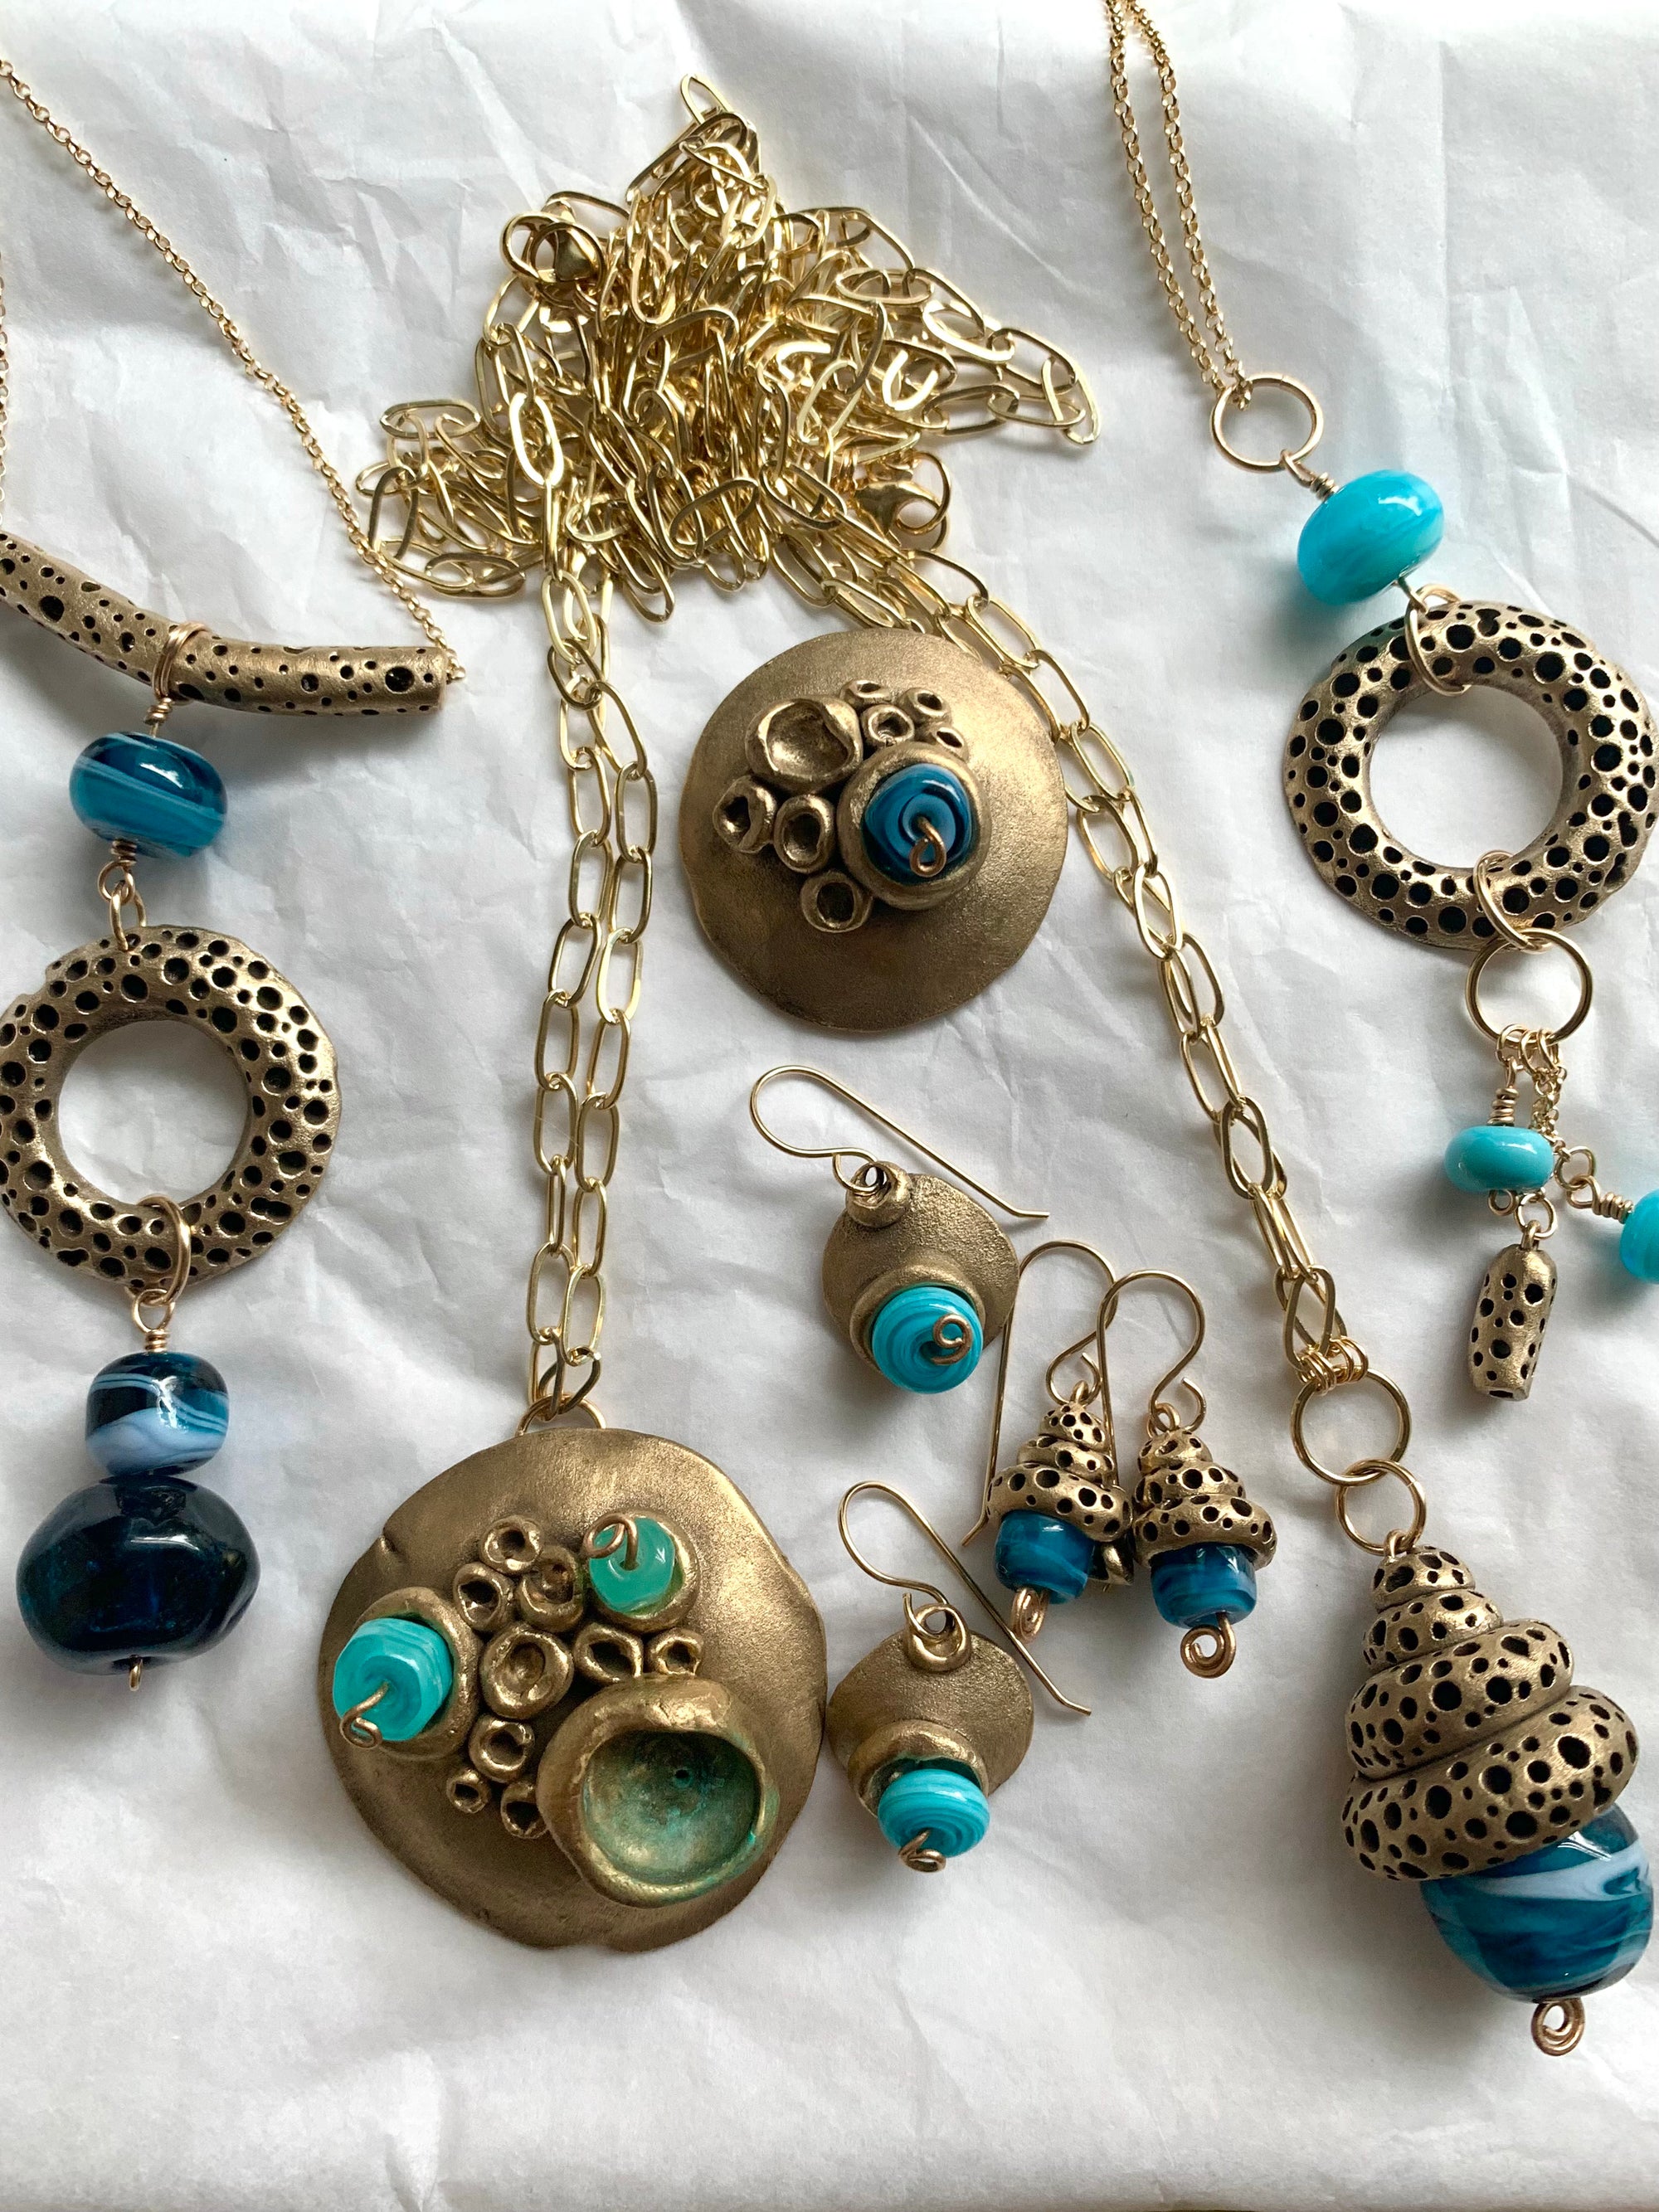 Bronze and blue glass artisan made ocean inspired jewelry